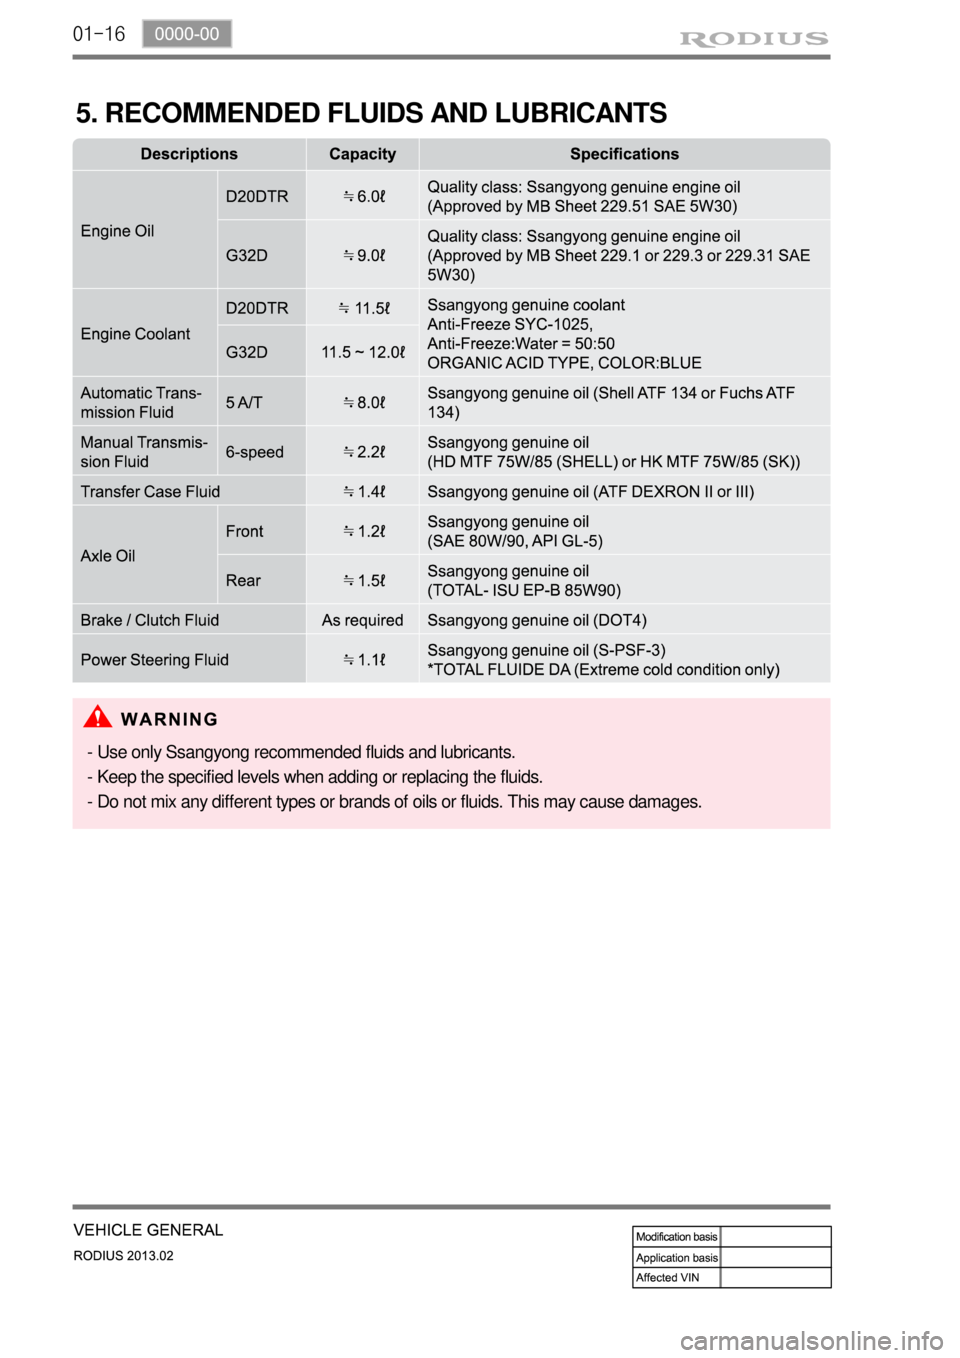 SSANGYONG TURISMO 2013  Service Manual 01-16
5. RECOMMENDED FLUIDS AND LUBRICANTS
- Use only Ssangyong recommended fluids and lubricants.
- Keep the specified levels when adding or replacing the fluids.
- Do not mix any different types or 